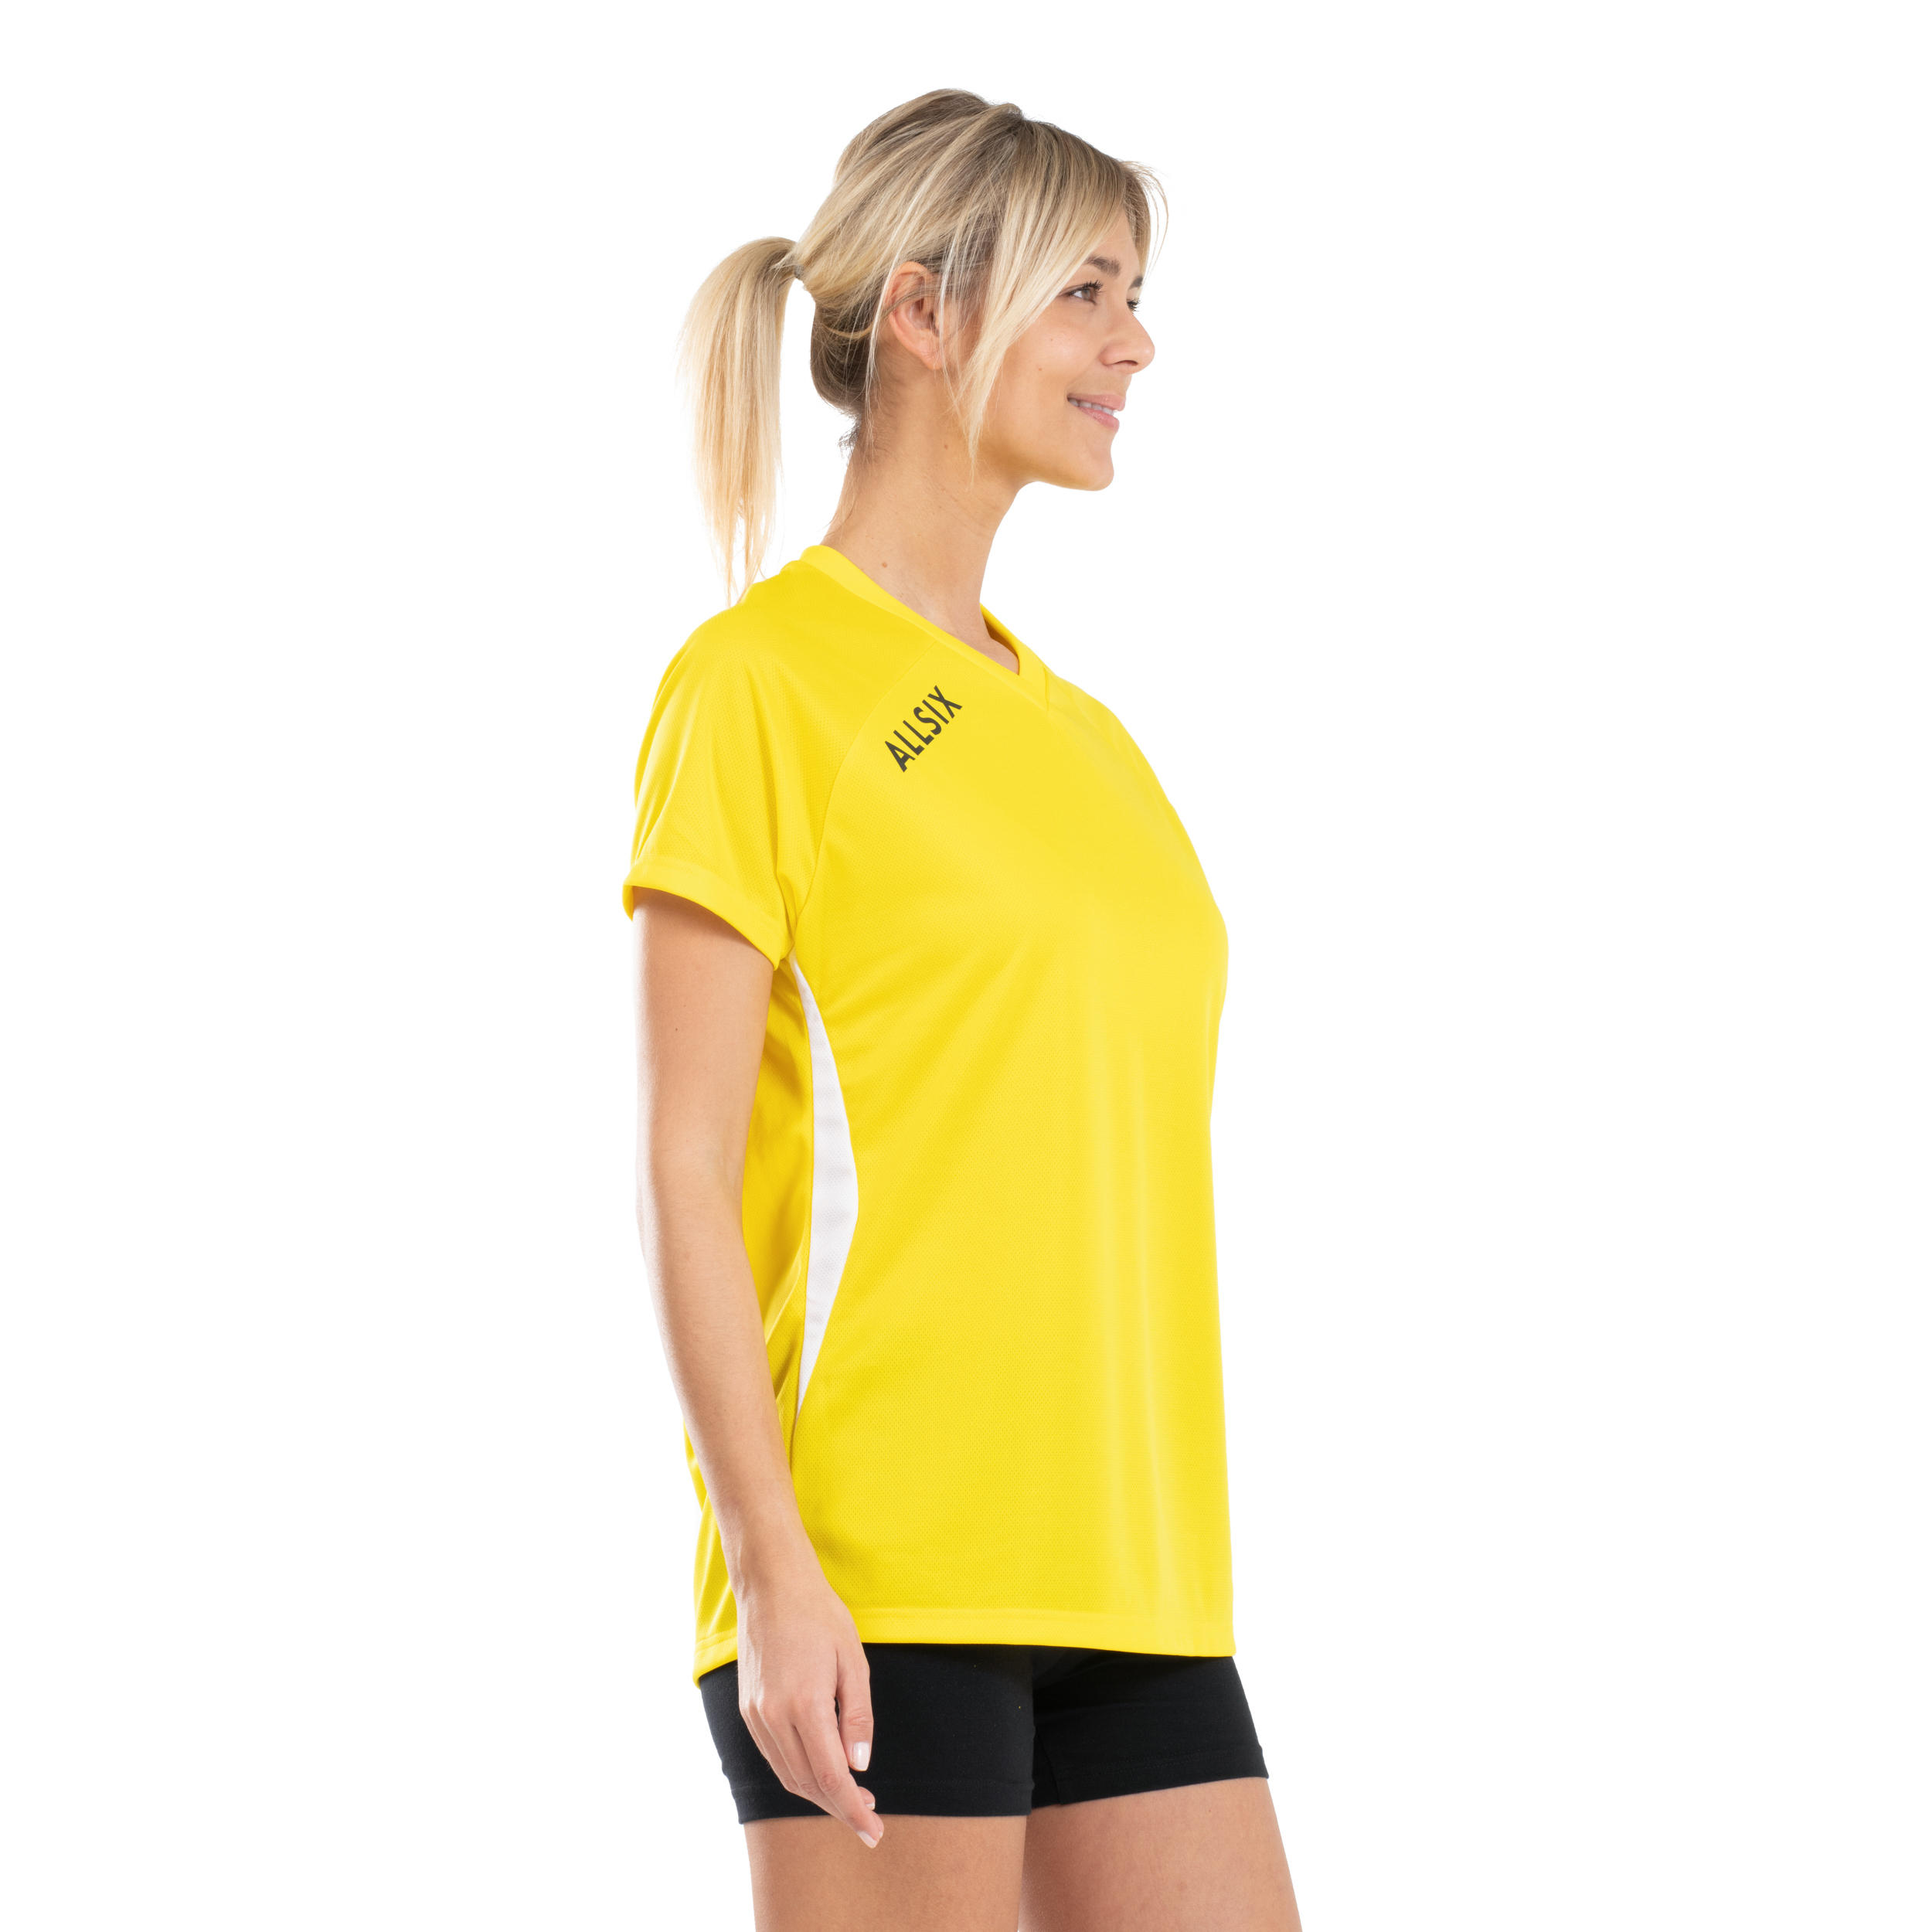 V100 Women's Volleyball Jersey - Yellow 4/8